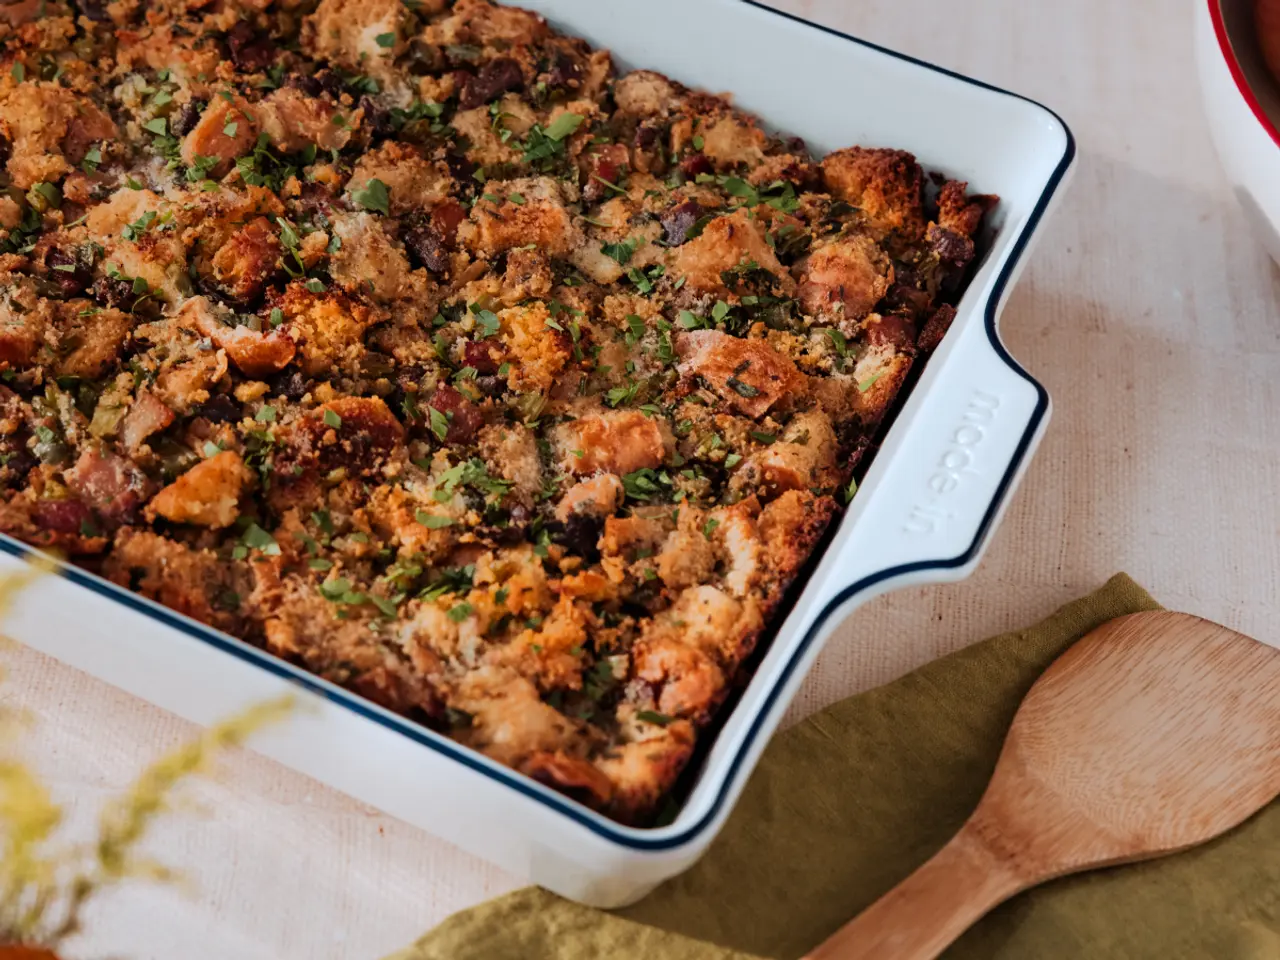 A freshly baked casserole with a golden-brown crust sprinkled with herbs is presented in a white baking dish next to a wooden spatula.